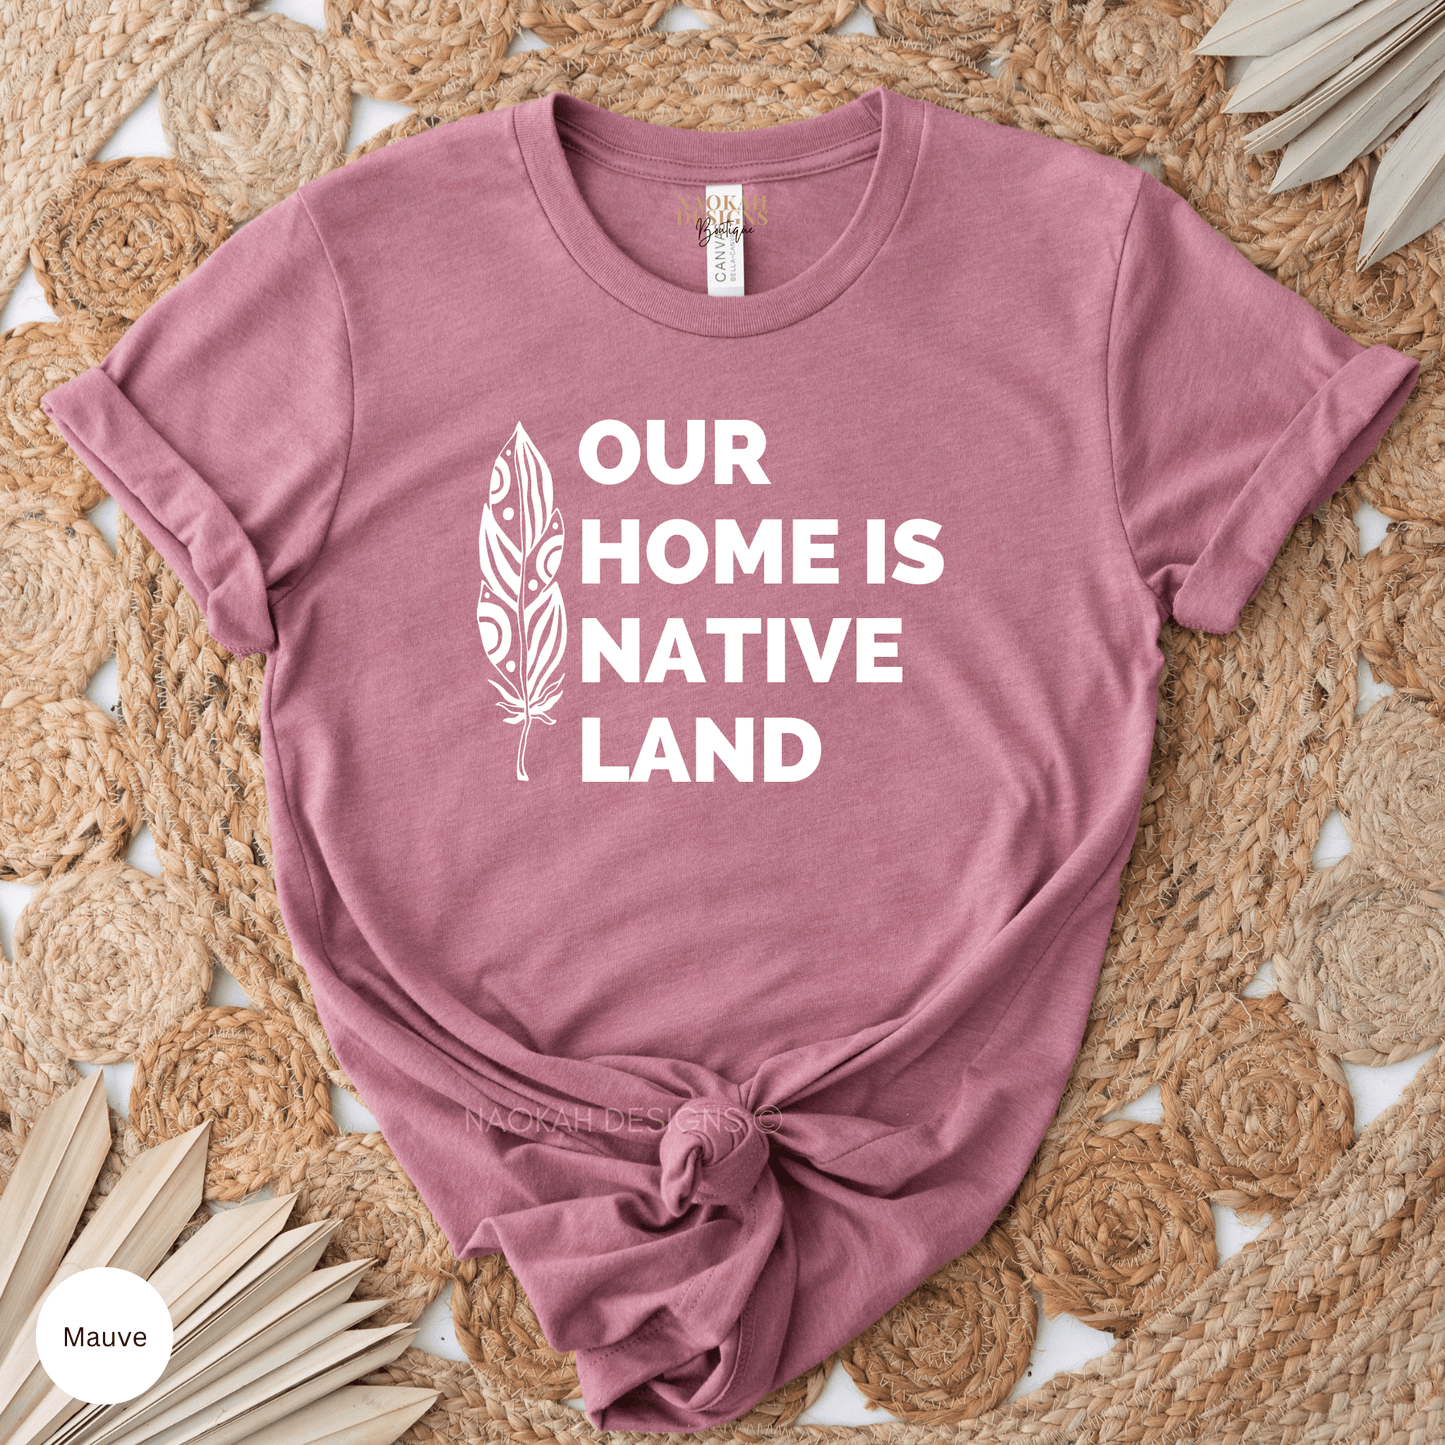 our home is native land shirt, we are on indigenous land t-shirt, this is native land shirt, land back shirt, land back indigenous shirt, native land shirt, no one is illegal on native land shirt, indigenous pride, native pride, resistance, decolonize shirt, indigenous lives matter shirt, decolonize education shirt, native shirt, equal rights shirt, equality, indigenous af, phenomenally indigenous t-shirt